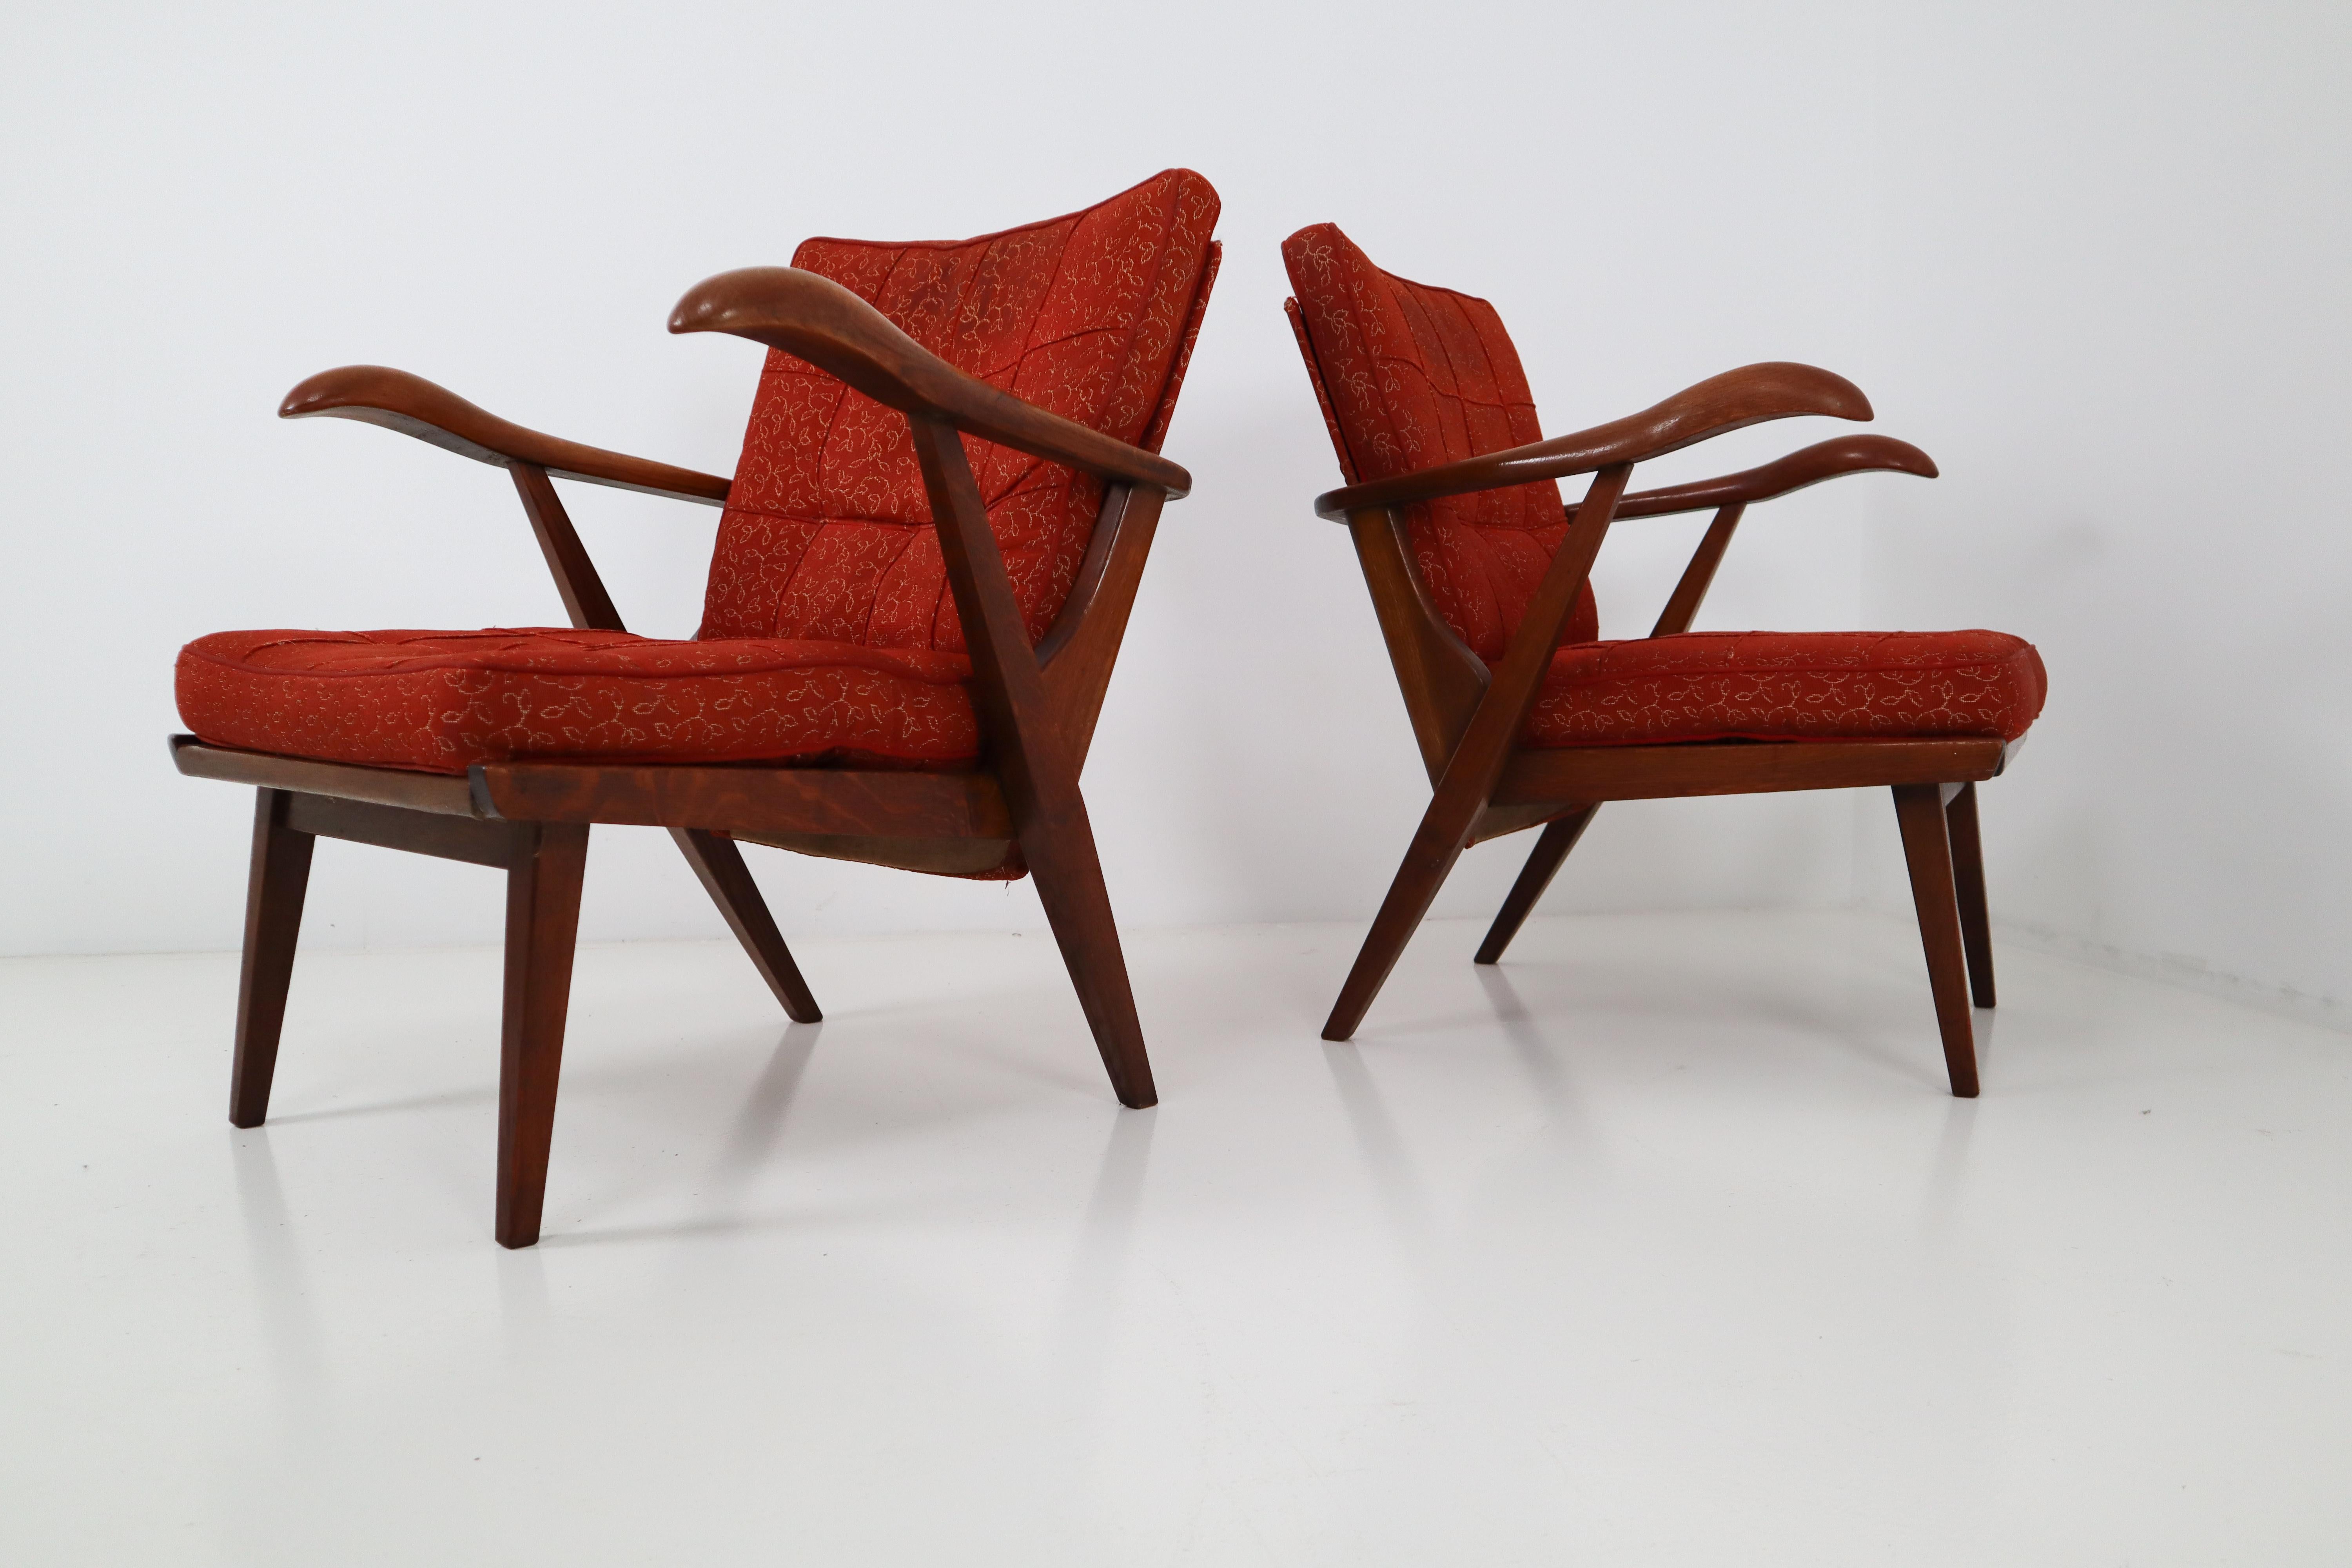 Fabric Pair of Lounge Chairs with Sculptural Oak Wooden Frame Czech Republic, 1950s